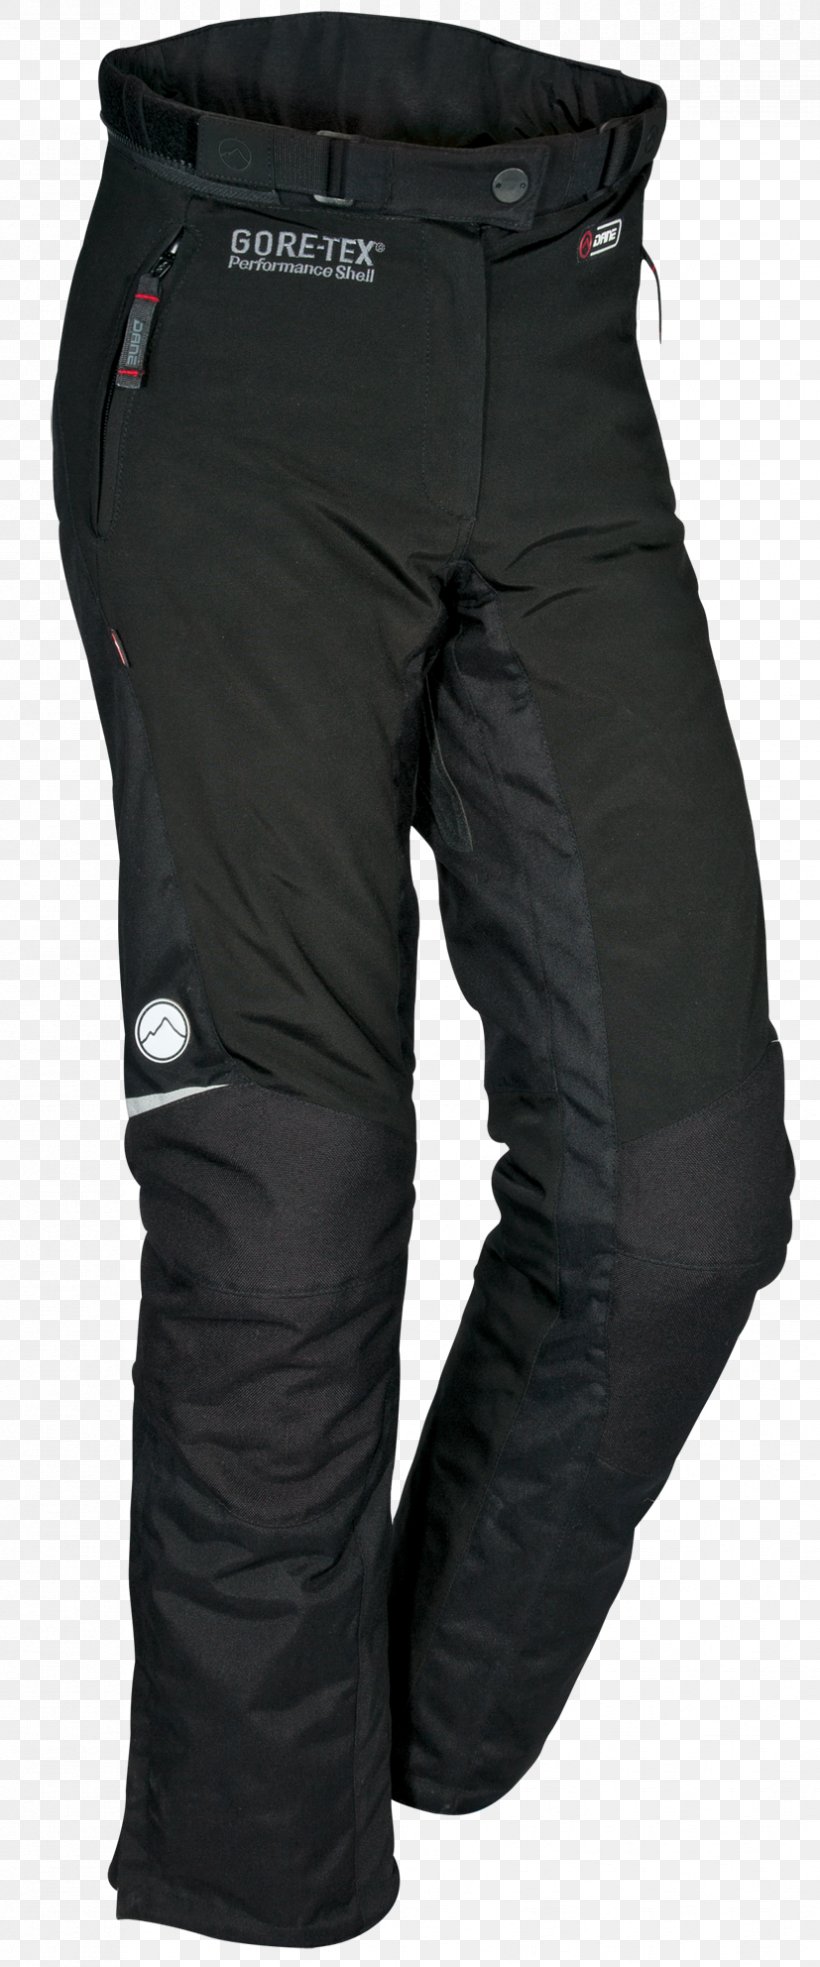 Motorcycle Personal Protective Equipment Pants Scooter Touring Motorcycle, PNG, 827x1984px, Motorcycle, Black, Boot, Glove, Goretex Download Free